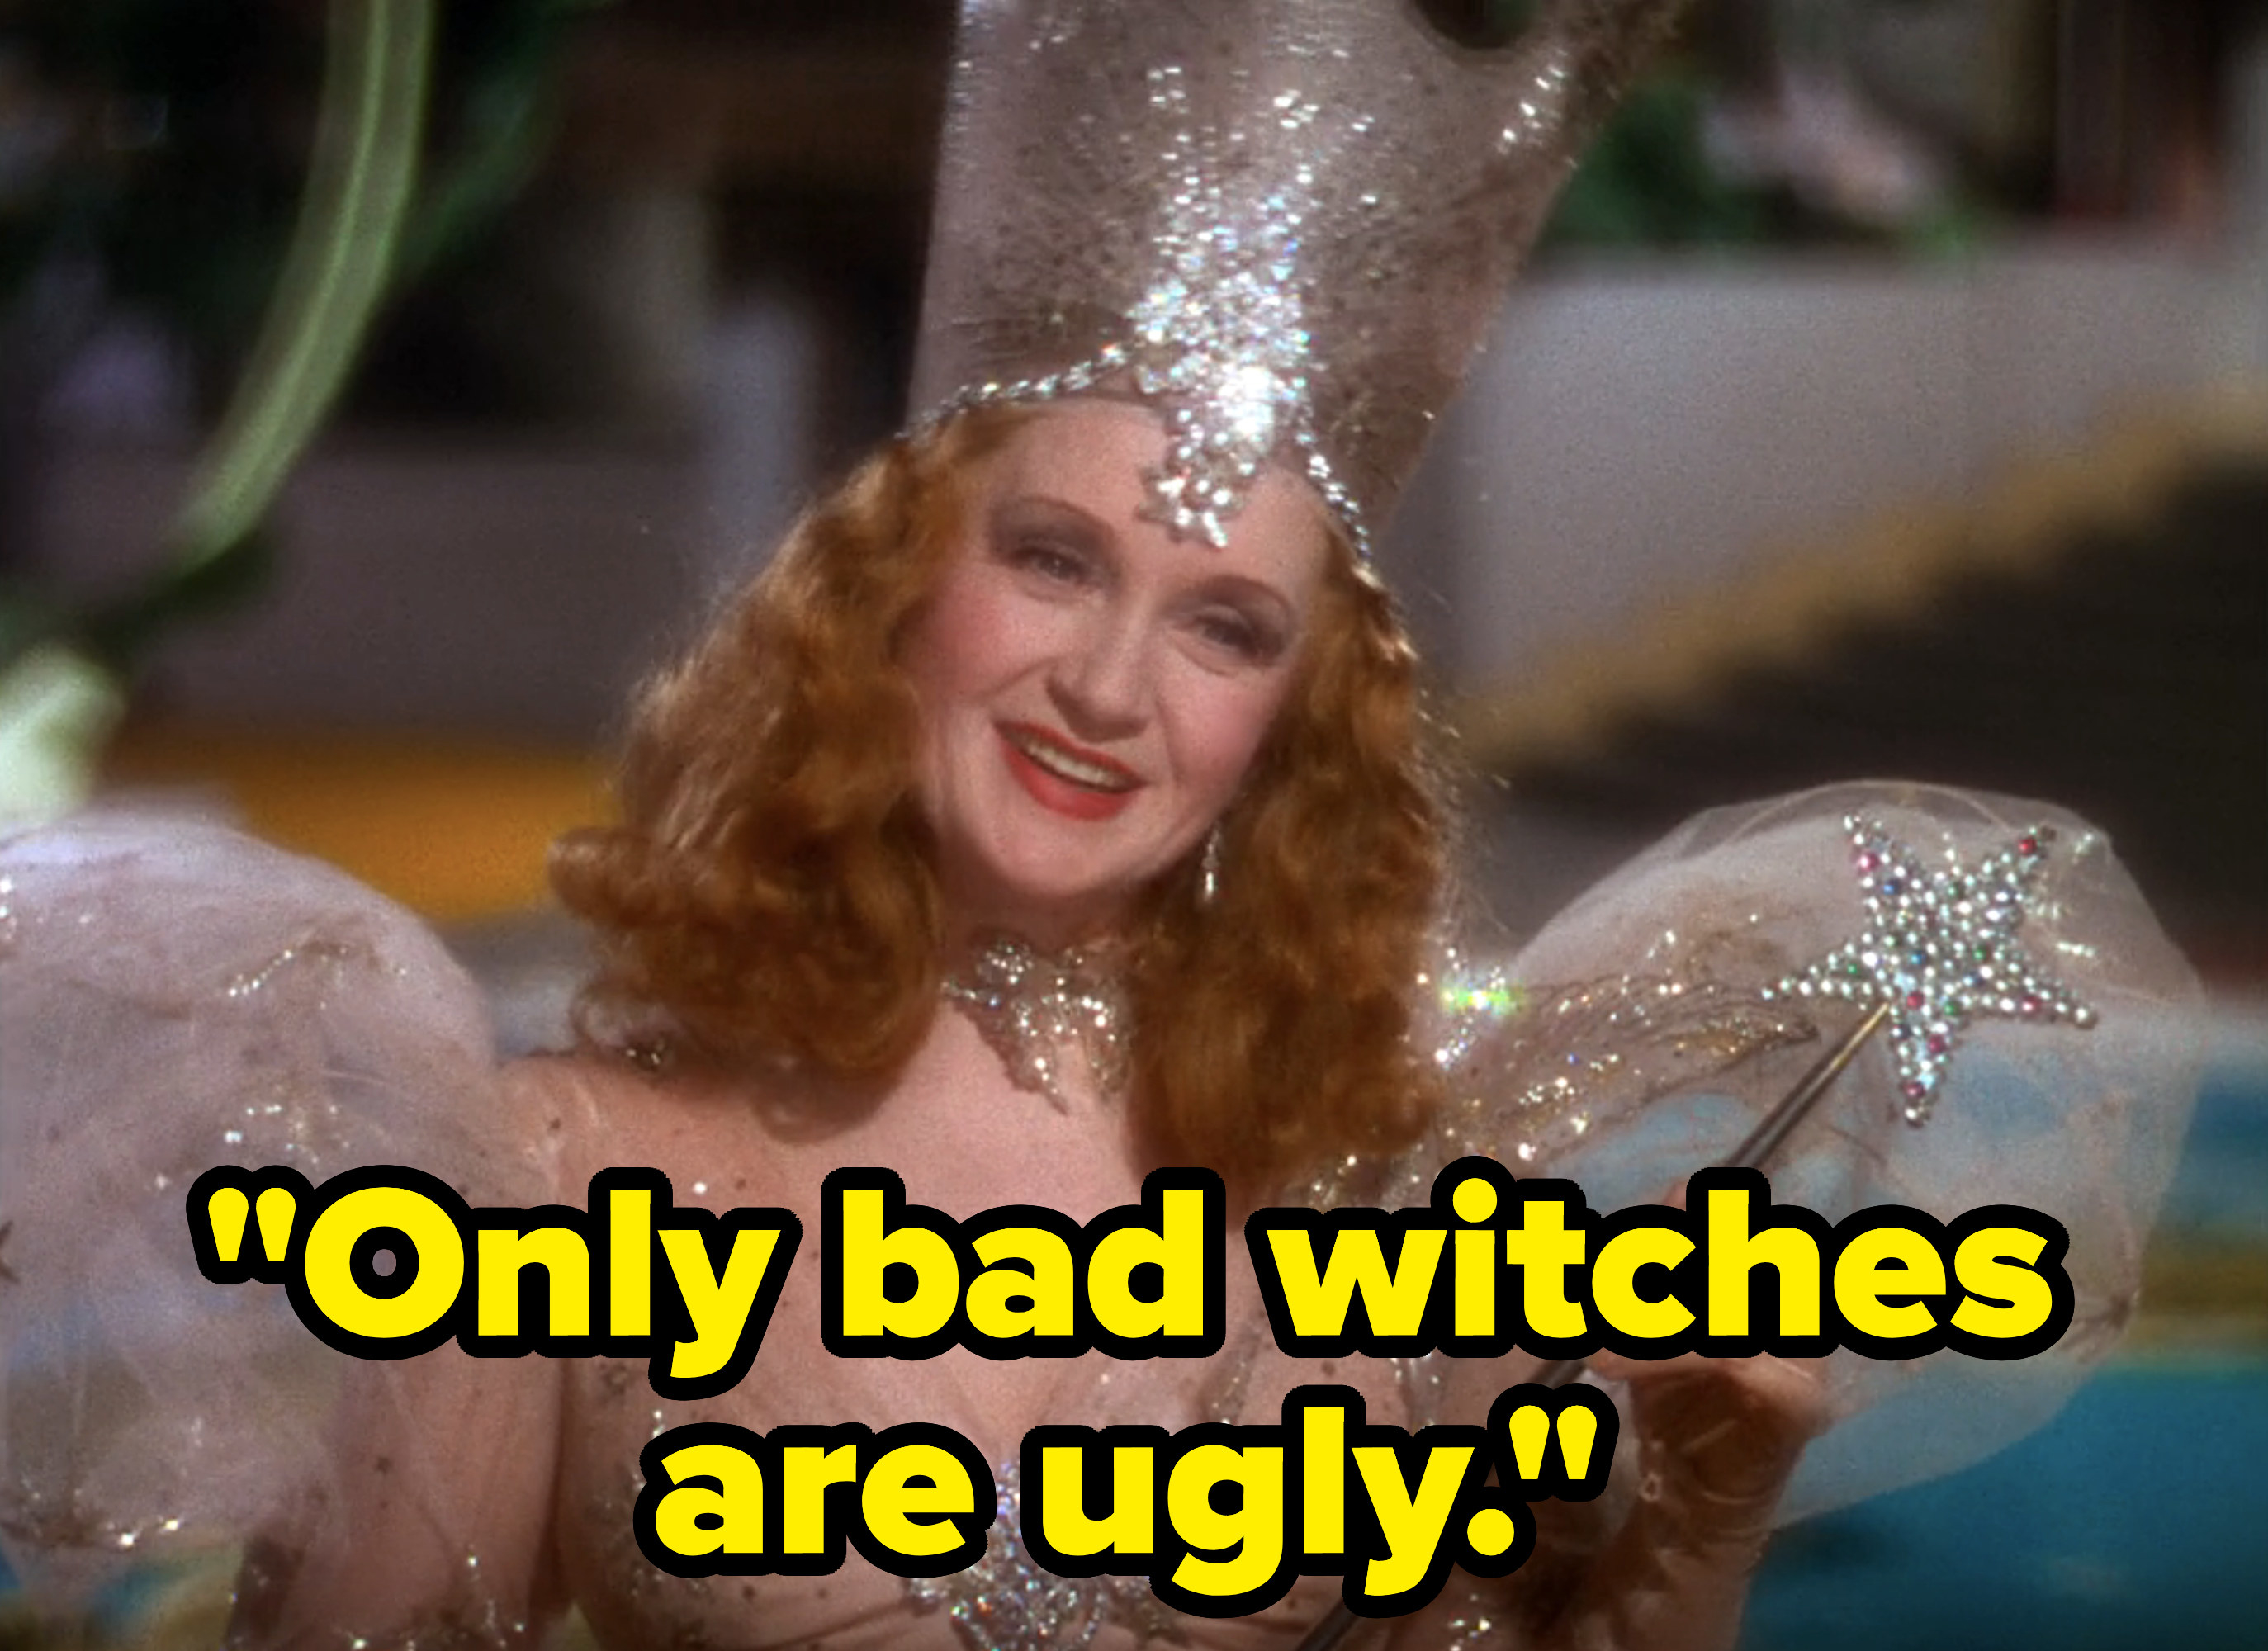 &quot;Only bad witches are ugly.&quot;